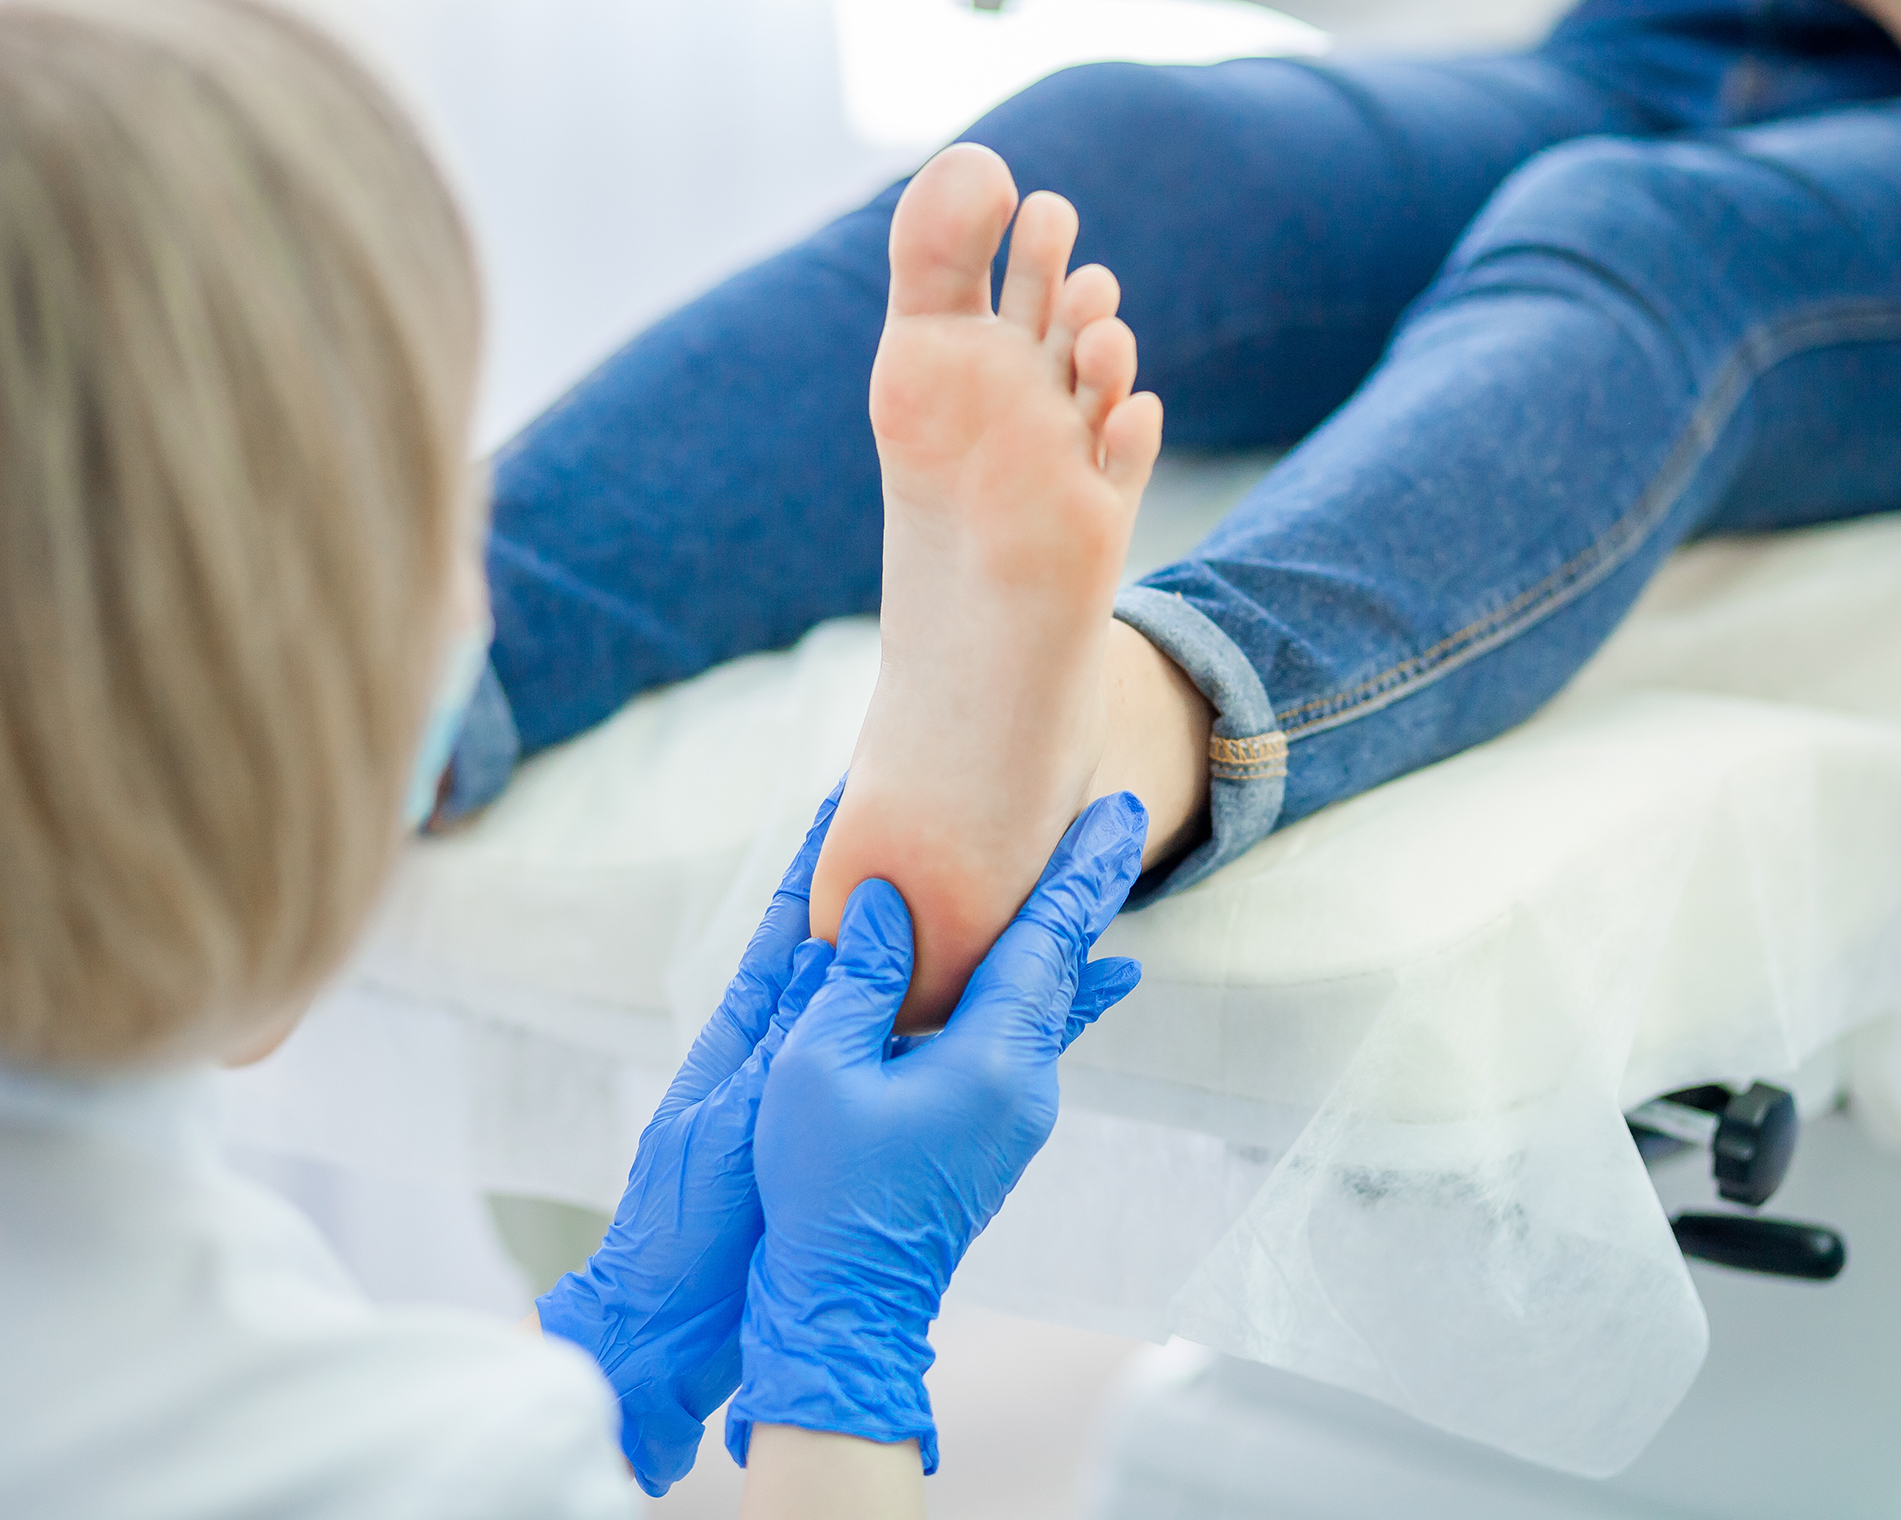 Your Podiatrist Can $ave You Money